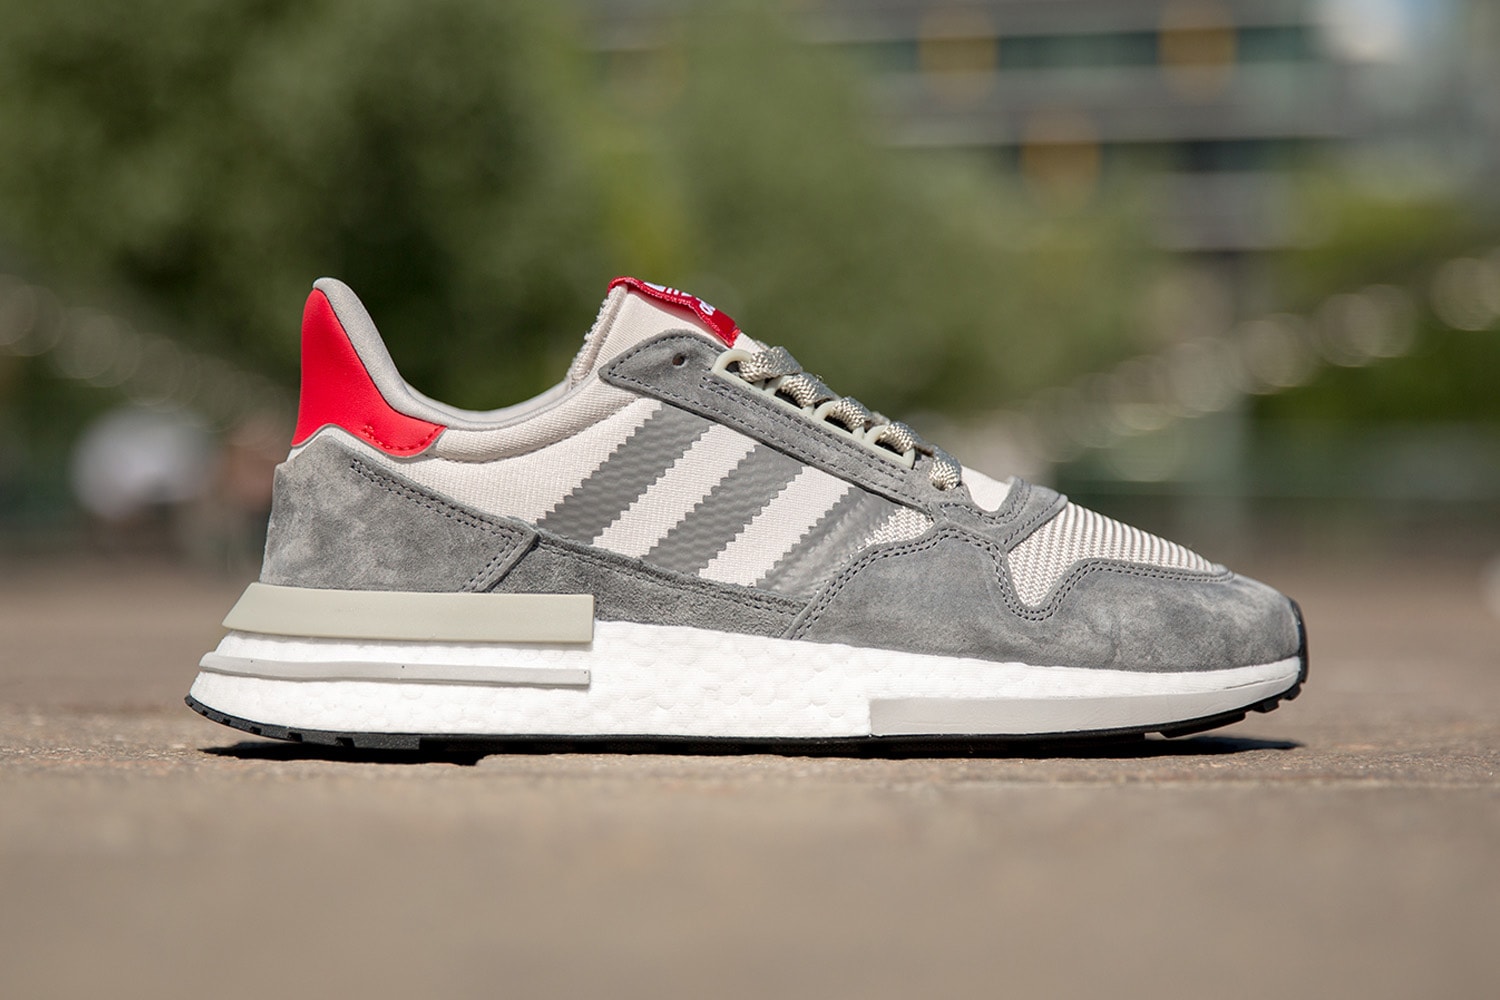 adidas Originals ZX500 OG BOOST Release Details Kicks Shoes Trainers Sneakers Footwear Available Purchase Buy Cop Soon Saturday 7 July £120 GBP